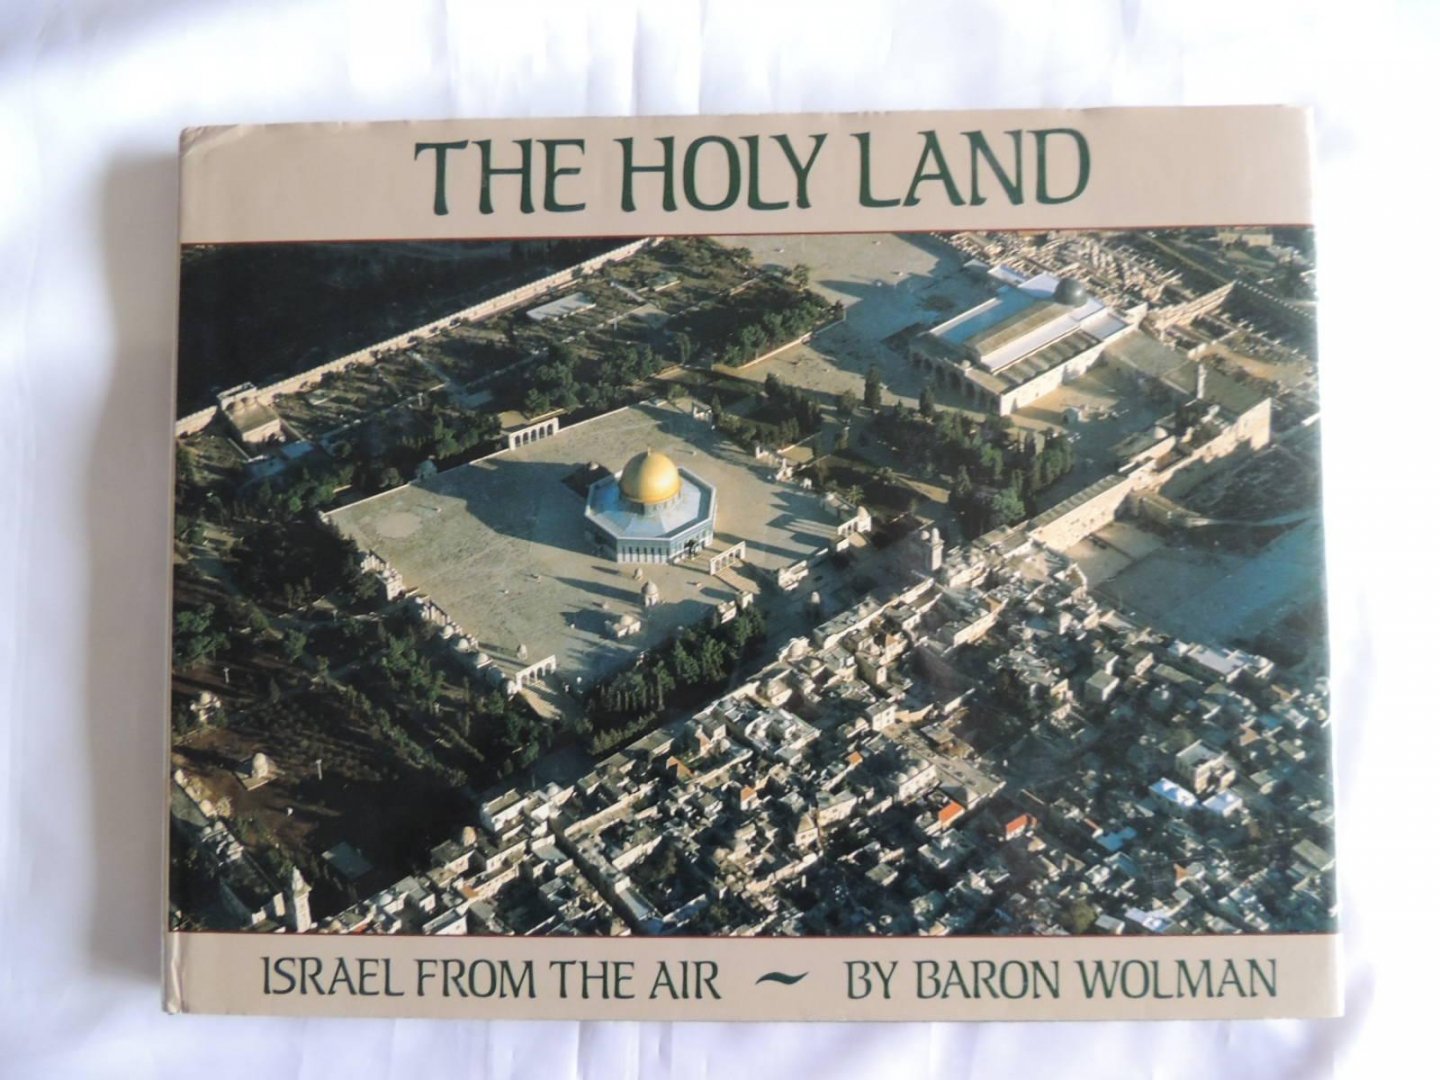 Wolman, Baron - Above the Holy Land - Israel from the Air